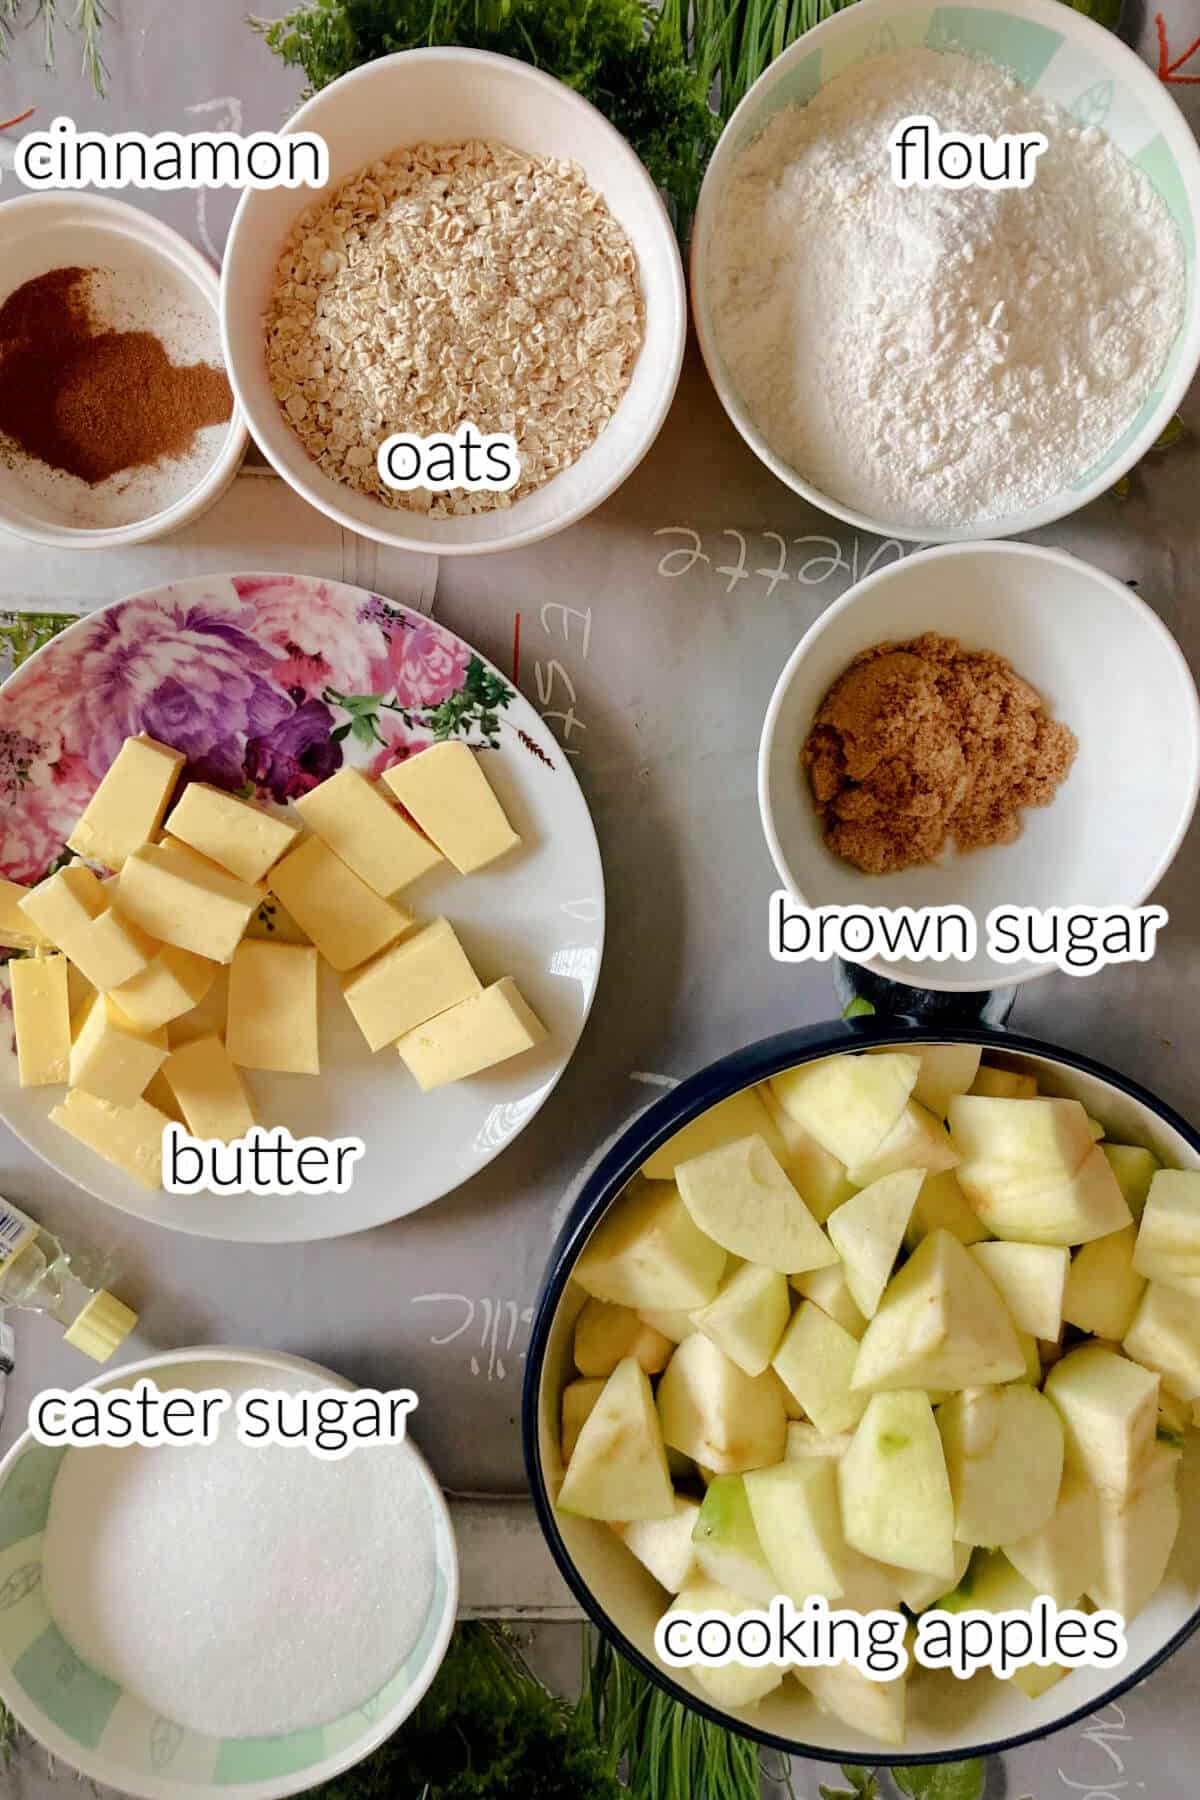 Ingredients needed to make apple crumble.